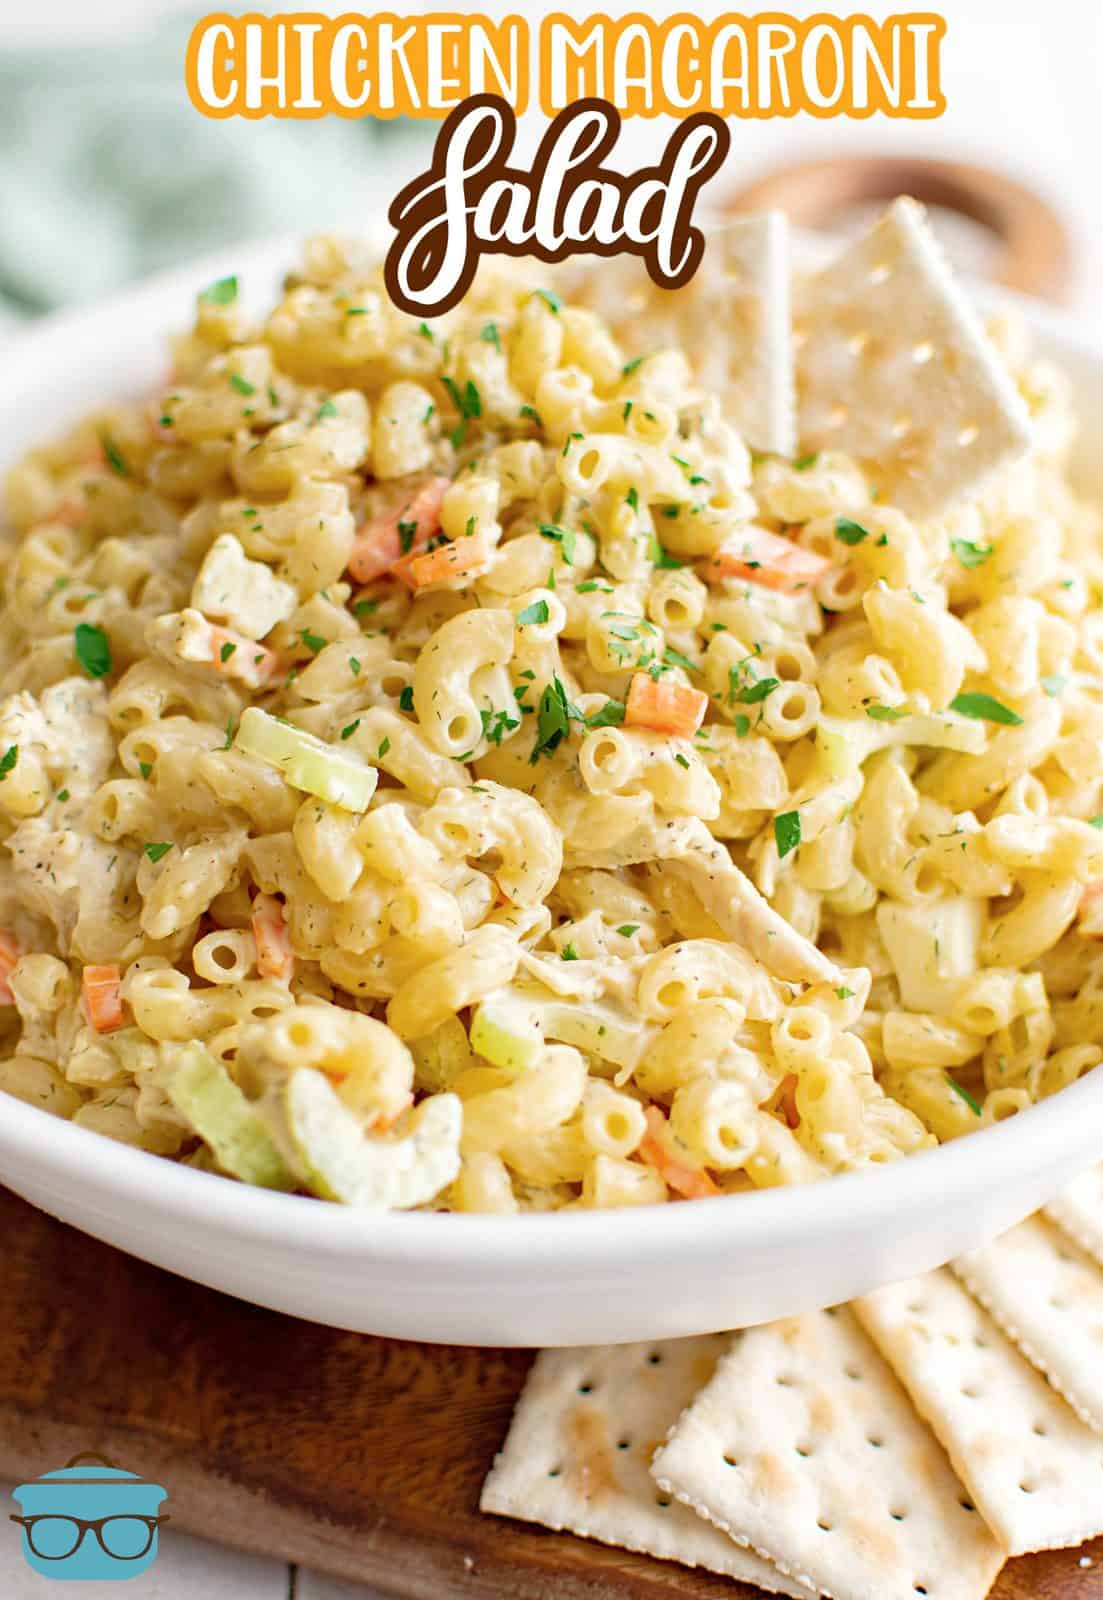 Pinterest image of Chicken Macaroni Salad in white bowl with saltine crackers in the top.